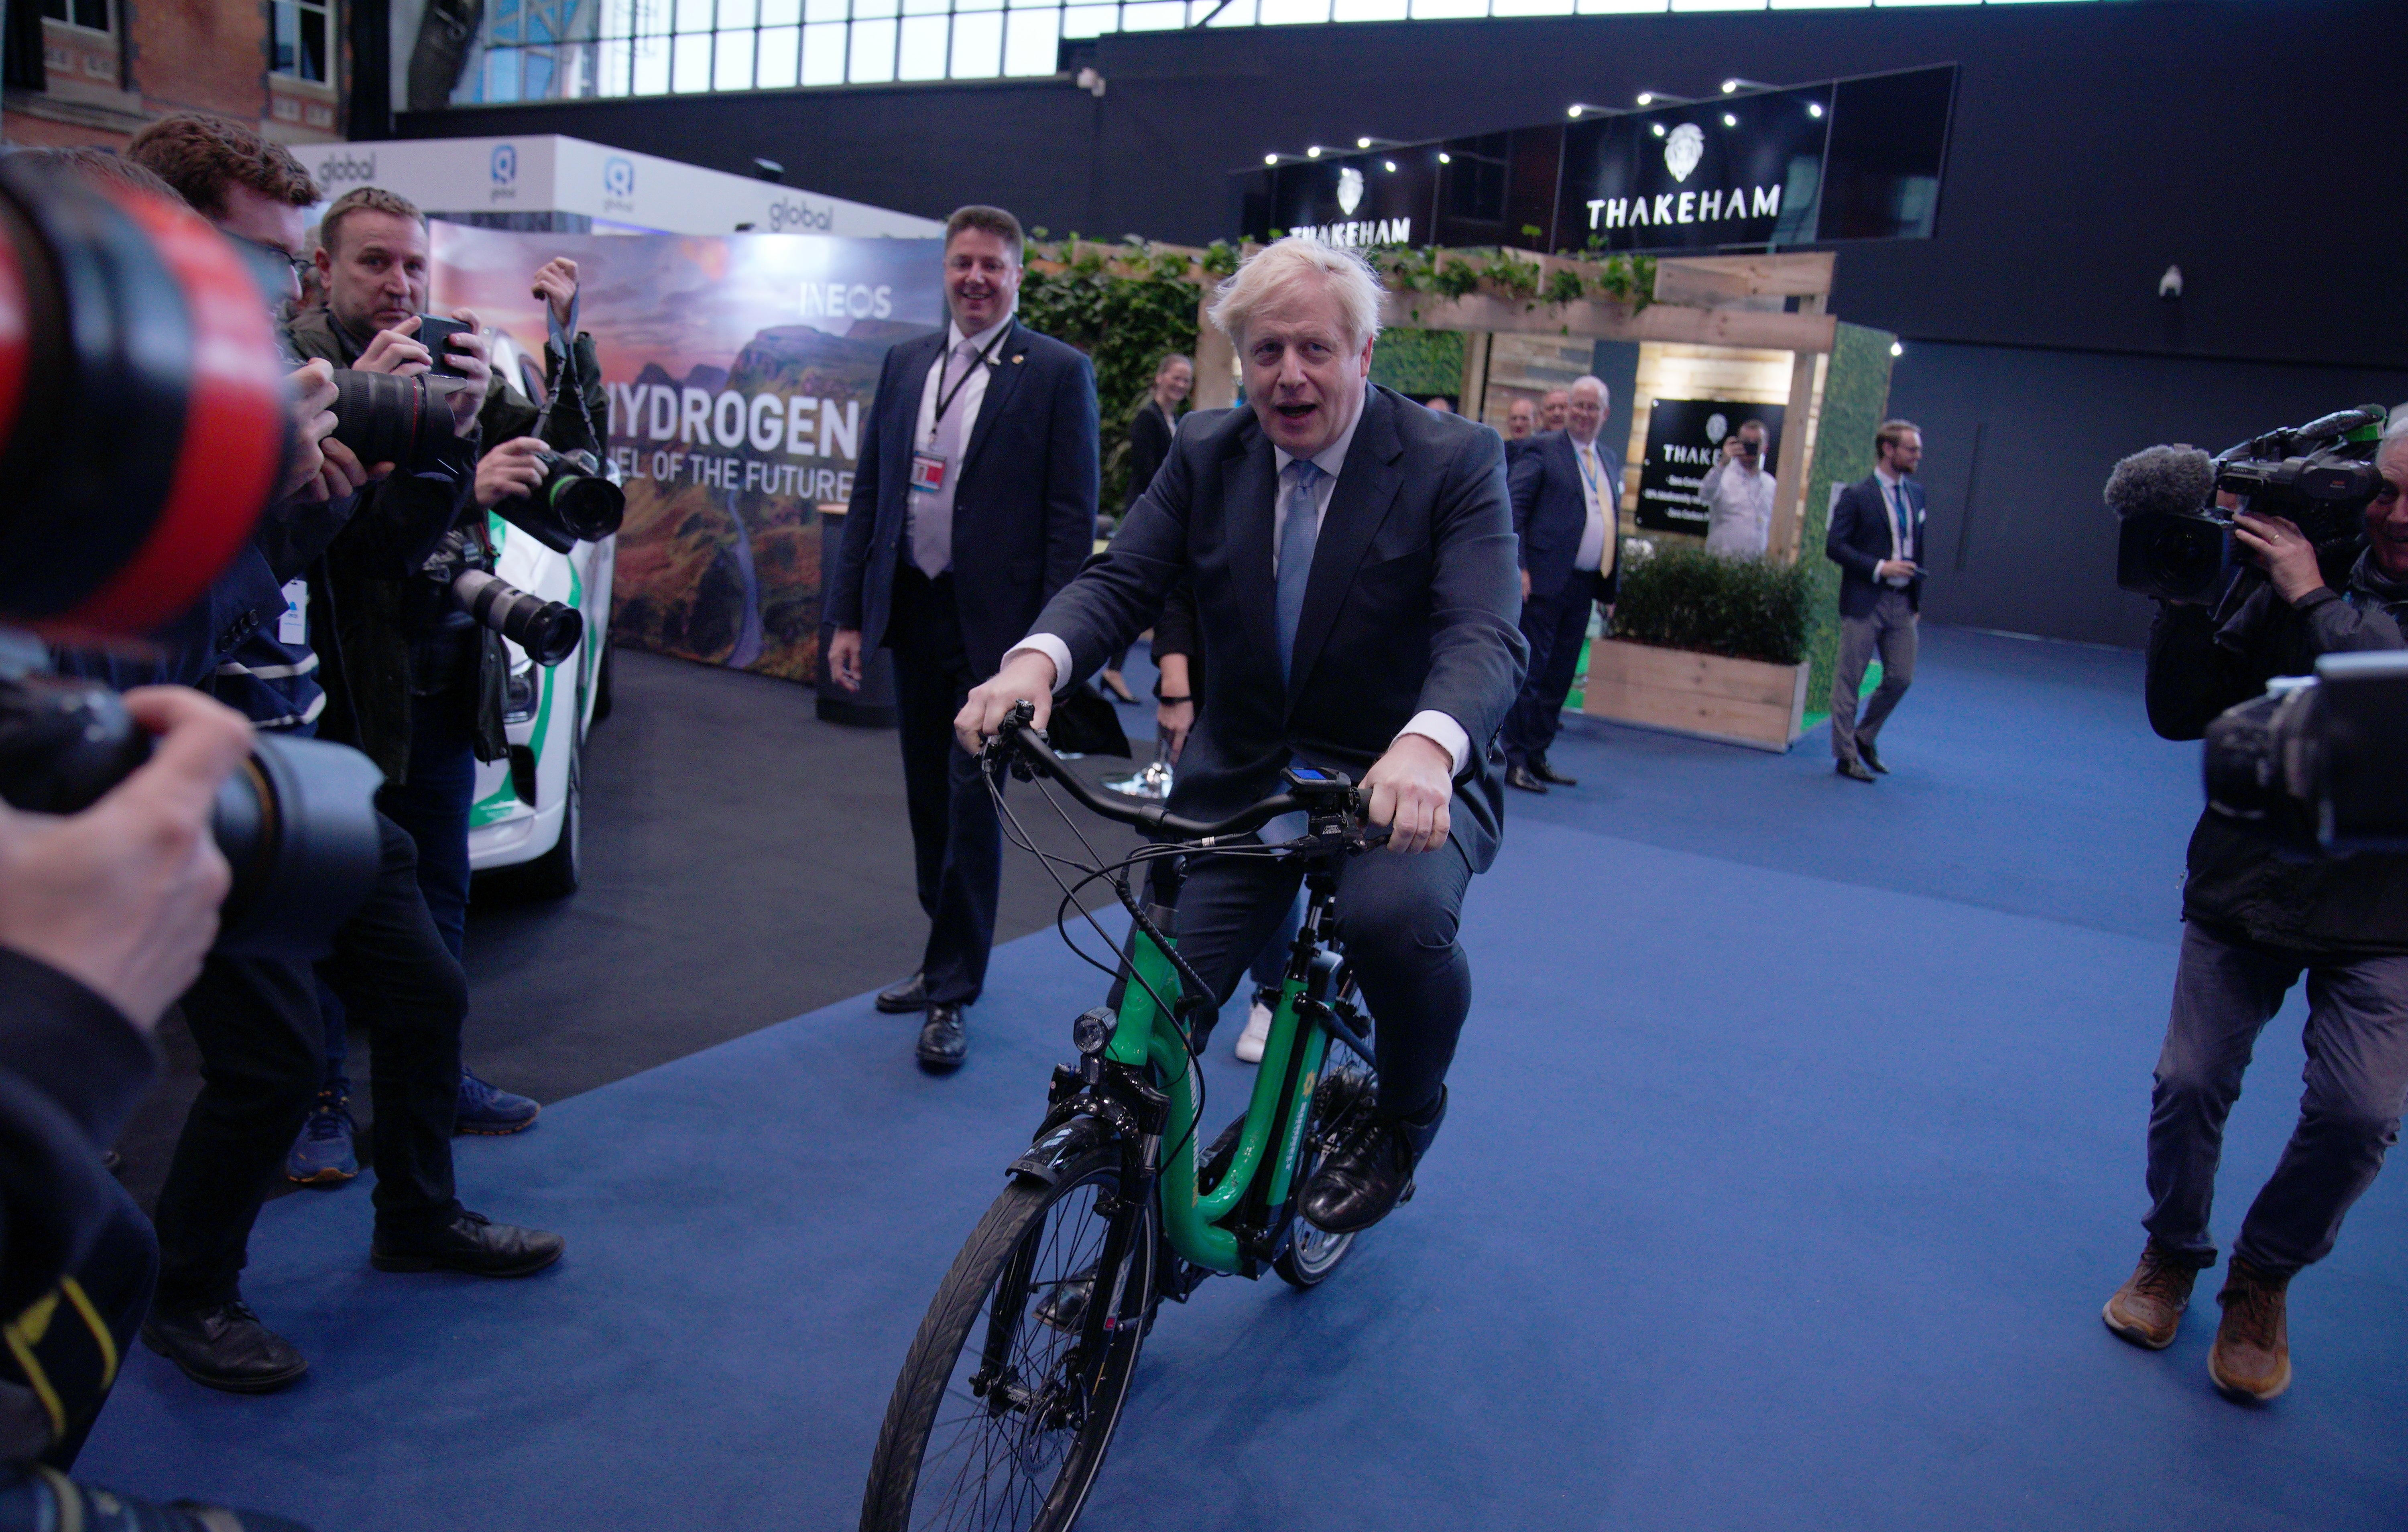 A rare moment of levity in 2021 for Mr Johnson as he rides a bicycle in the Manchester Central Convention Complex during the Conservative Party Conference (Peter Byrne/PA)